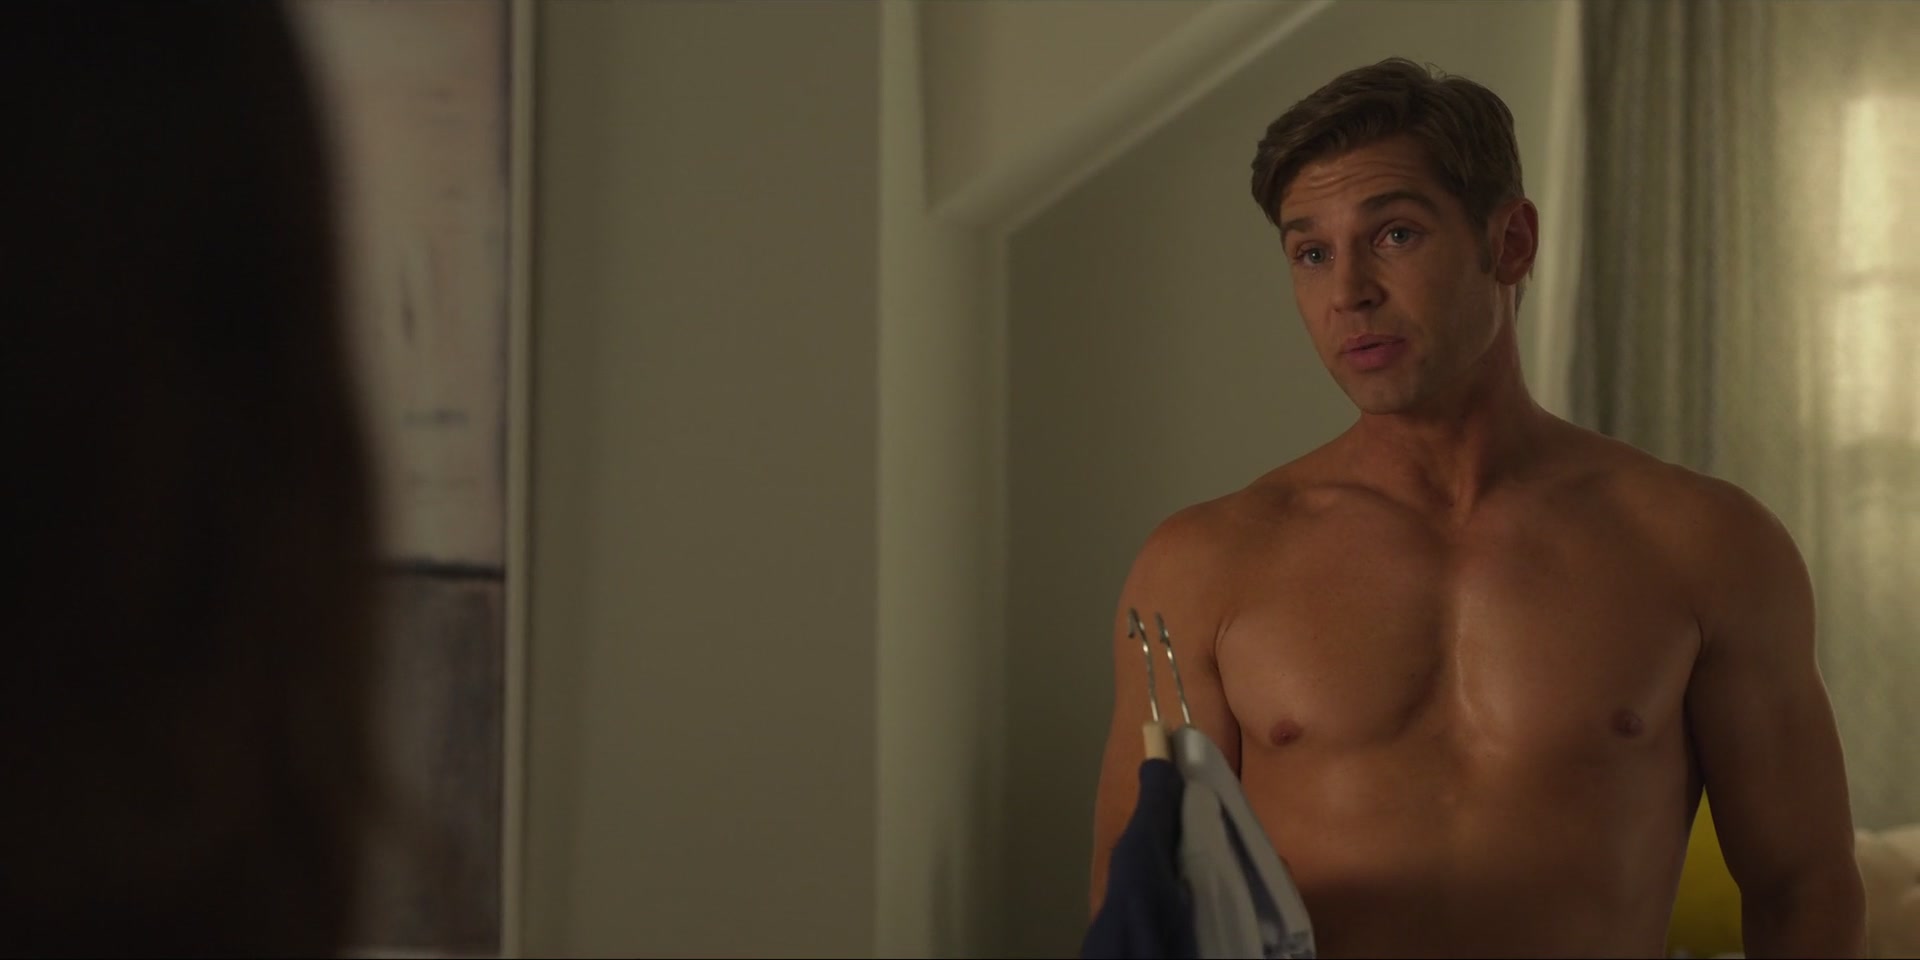 SIMPLY RESTITUDA: Mike Vogel in series Sex/Life (Ep. 